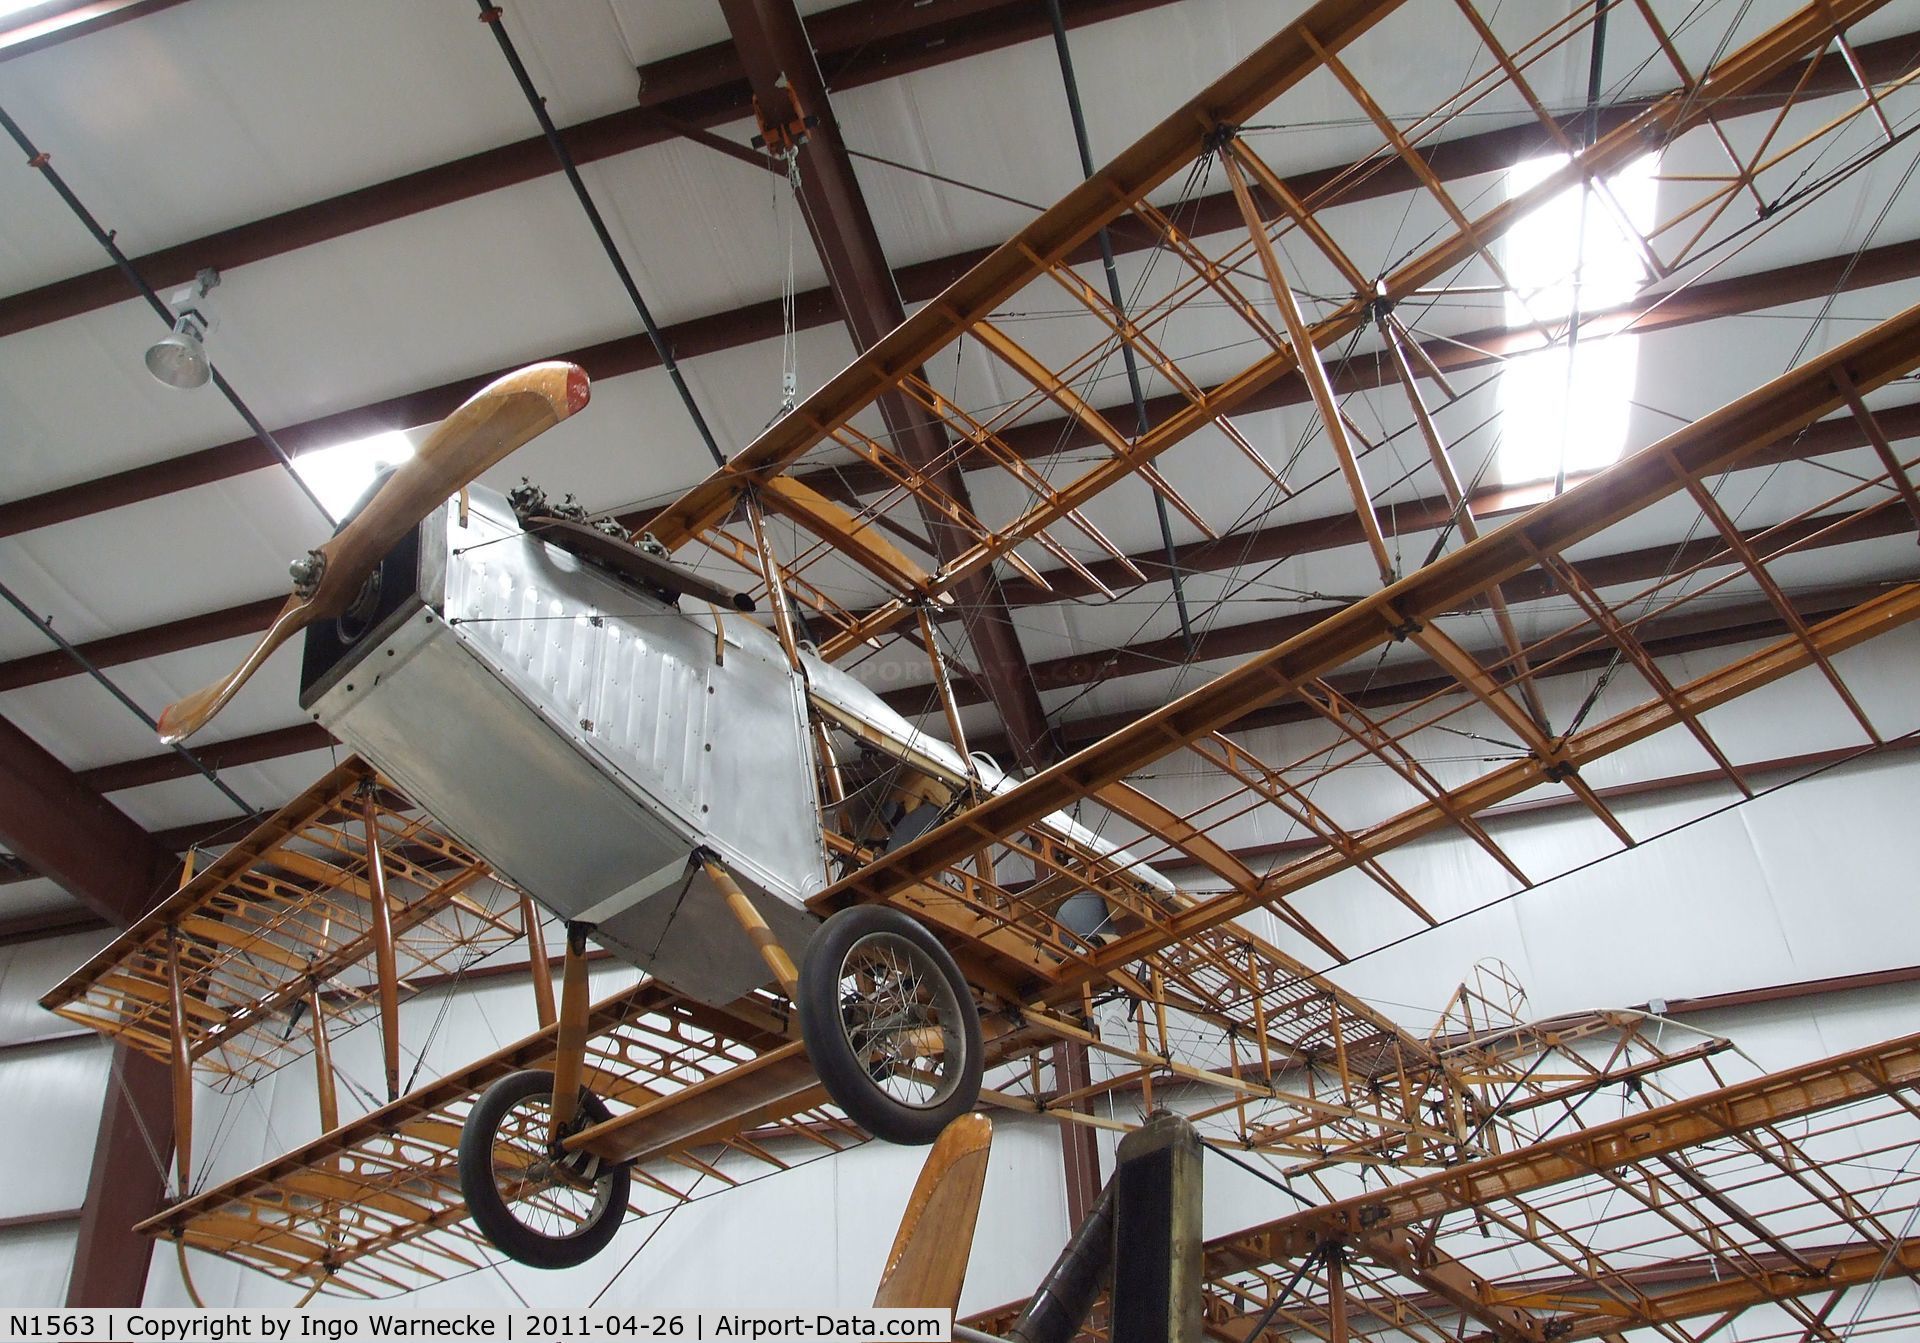 N1563, Curtiss JN-4D Jenny C/N D-51, Curtiss JN-4D (without skin) at the Yanks Air Museum, Chino CA